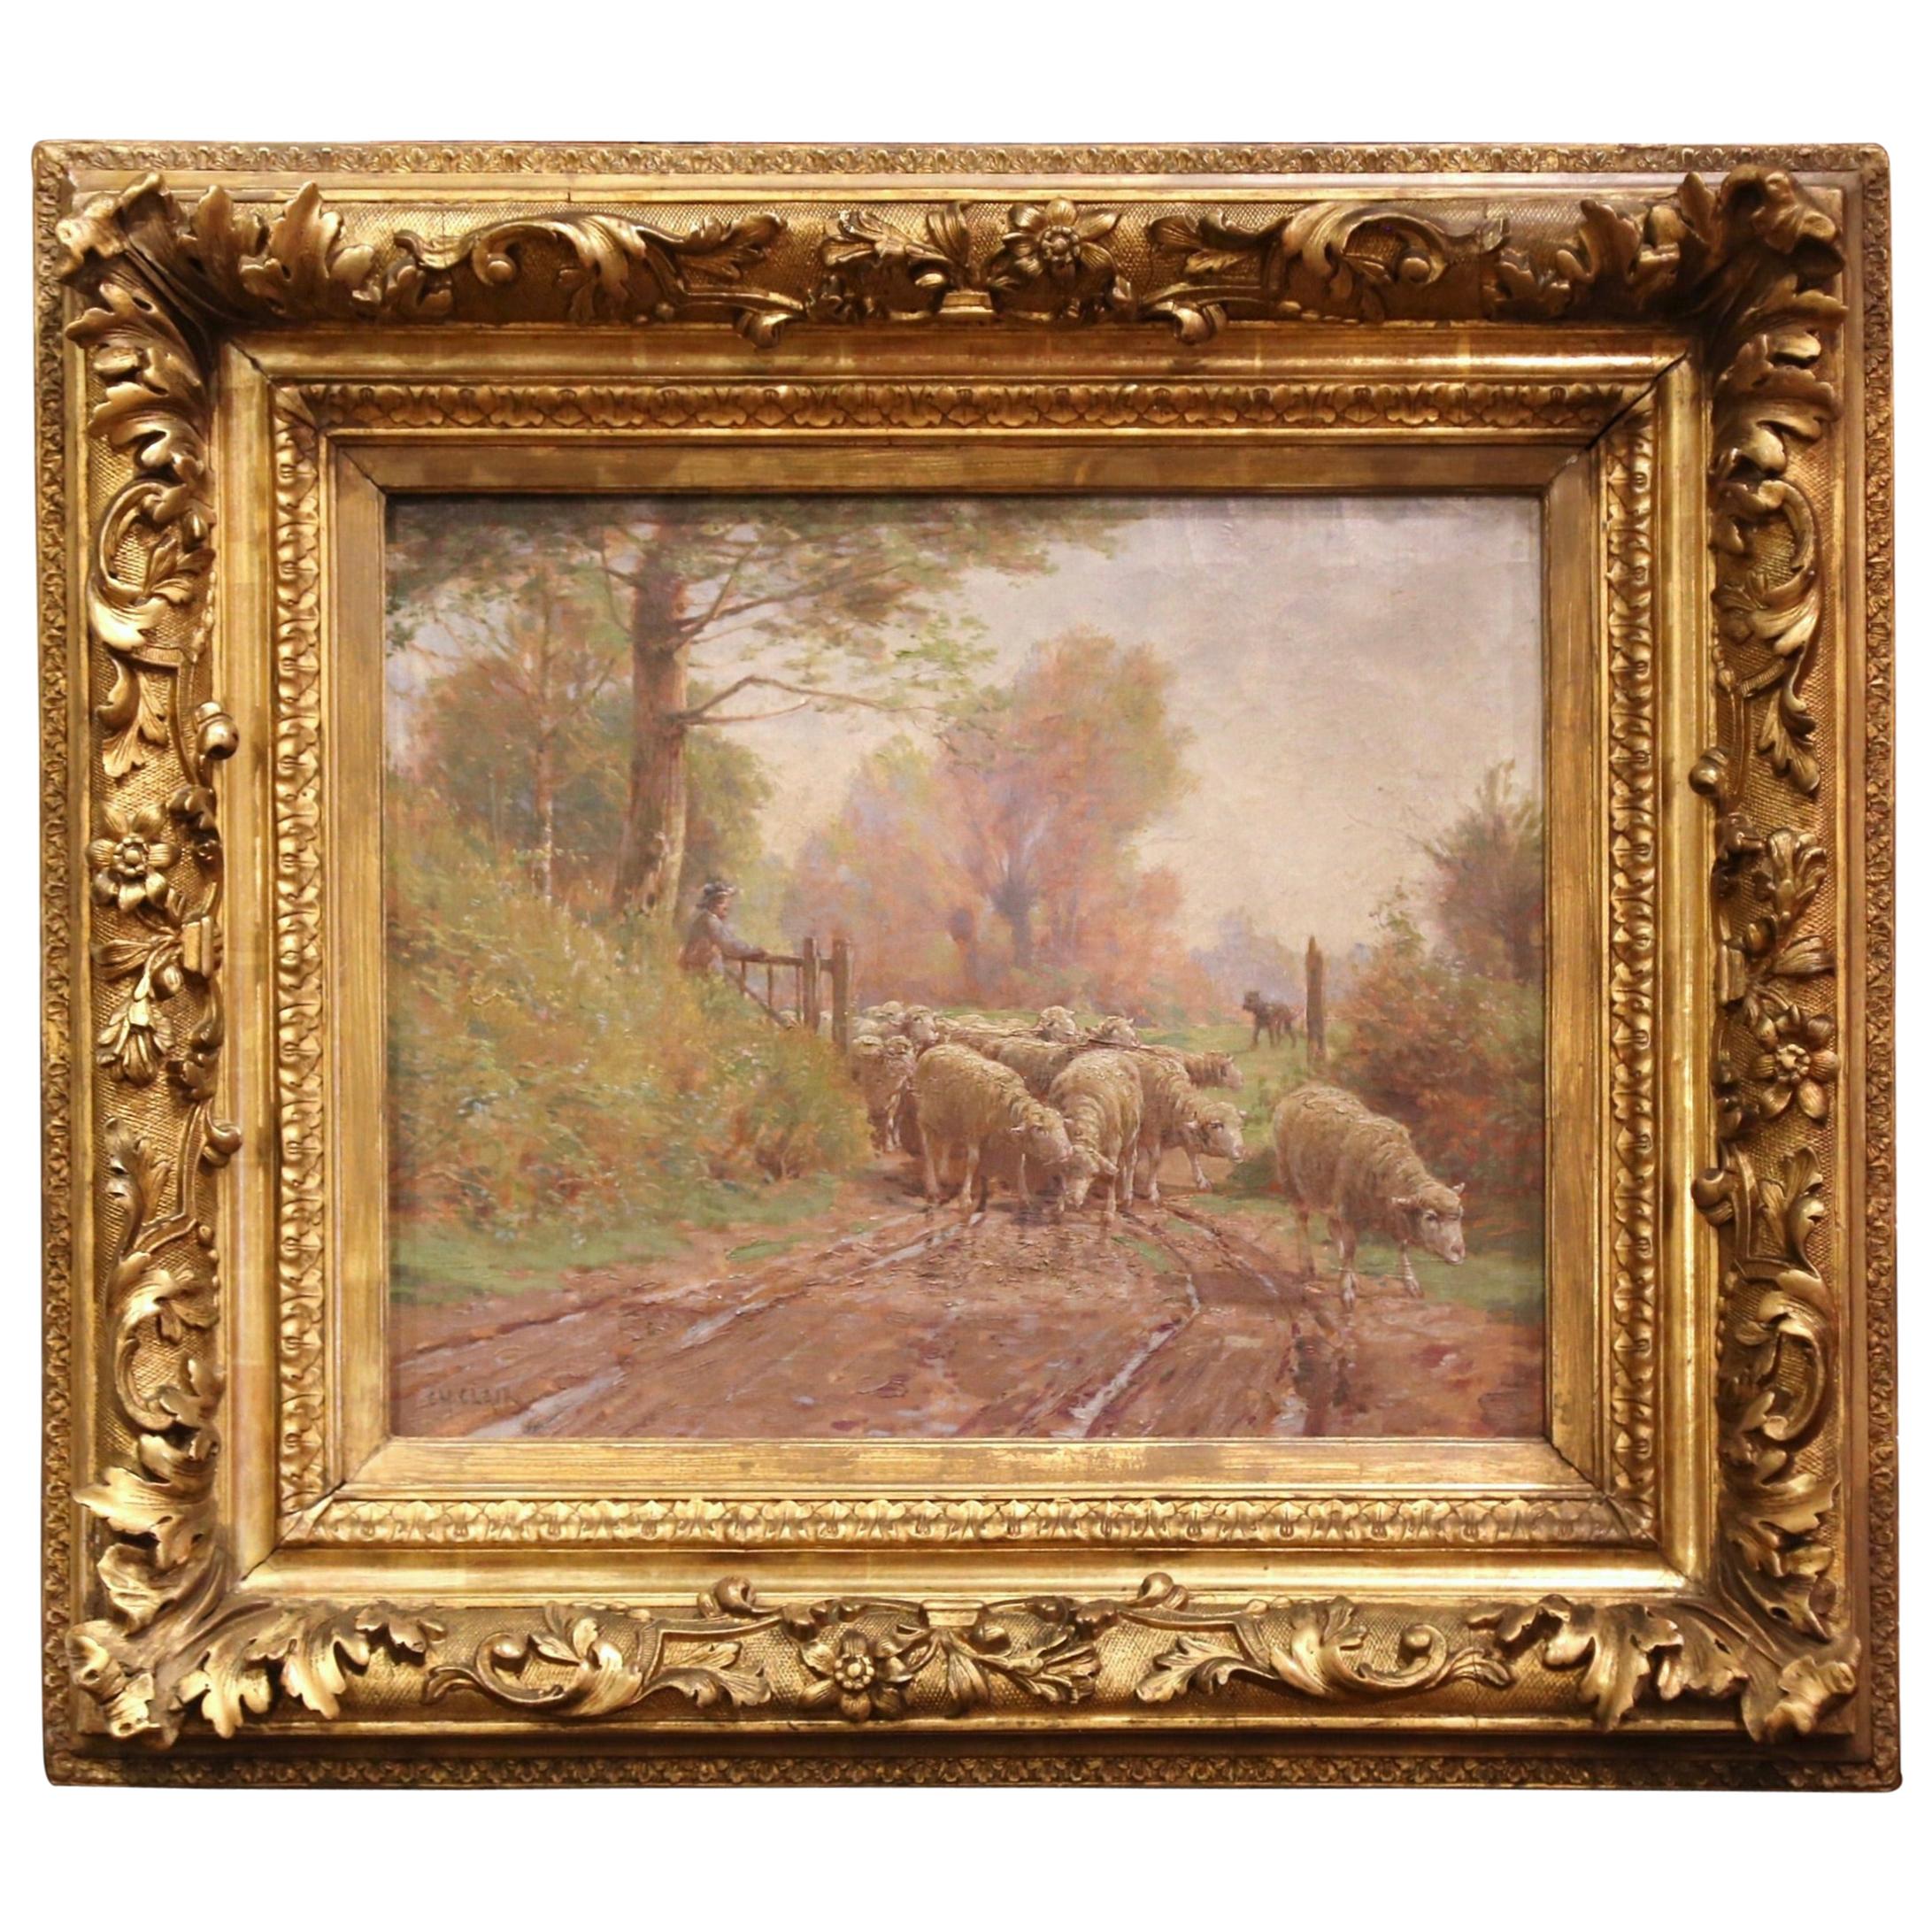 19th Century French Sheep Painting in Carved Gilt Frame Signed Charles Clair